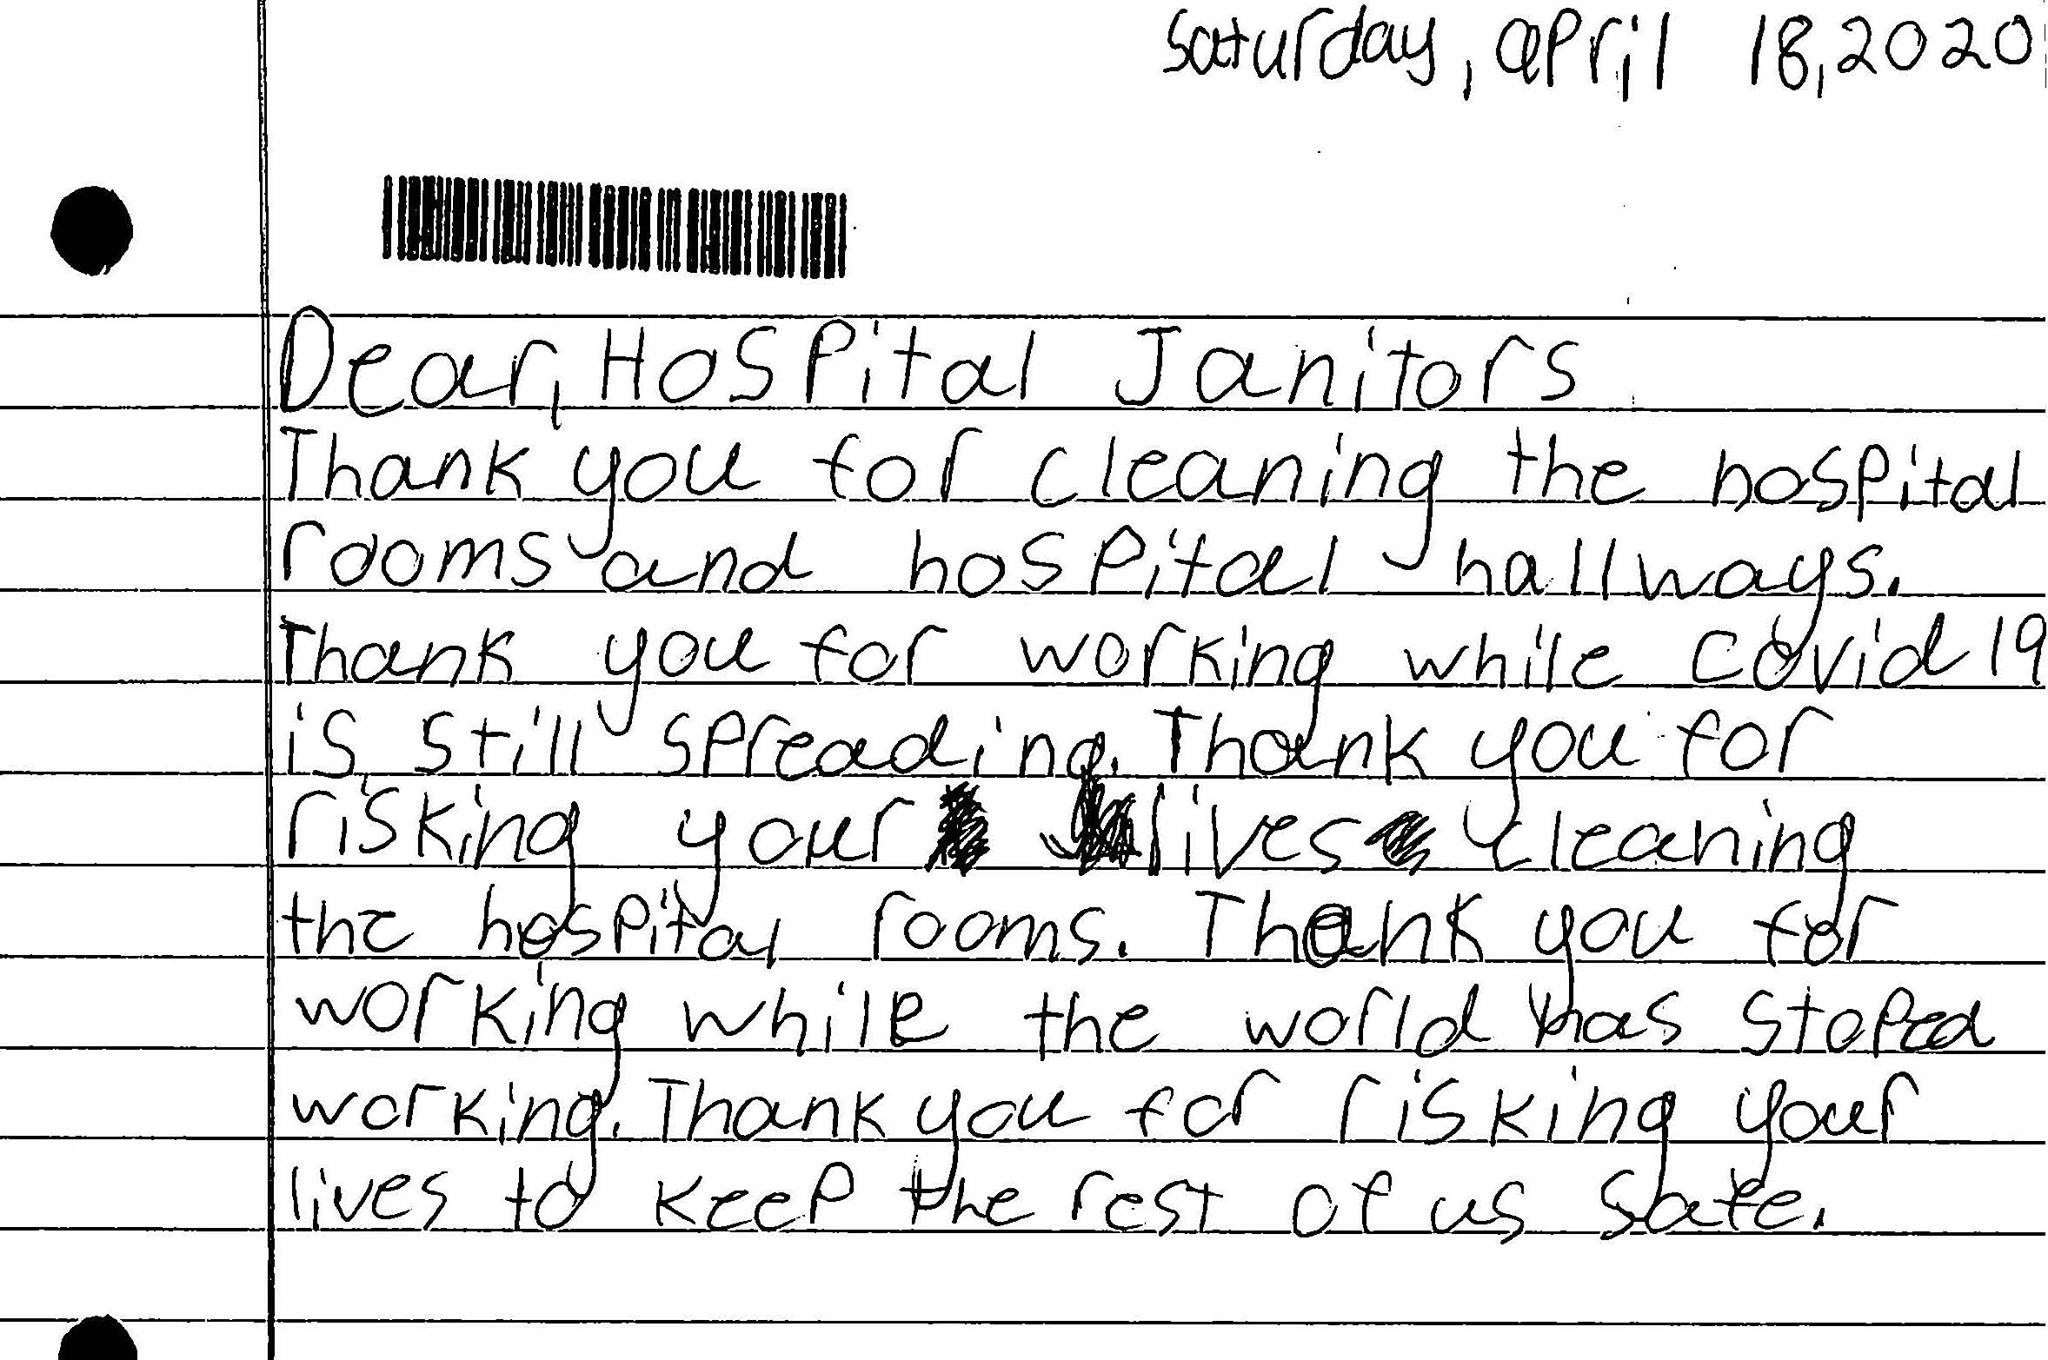 Hhs Evs Team Receives Thank You Letter From Local Boy